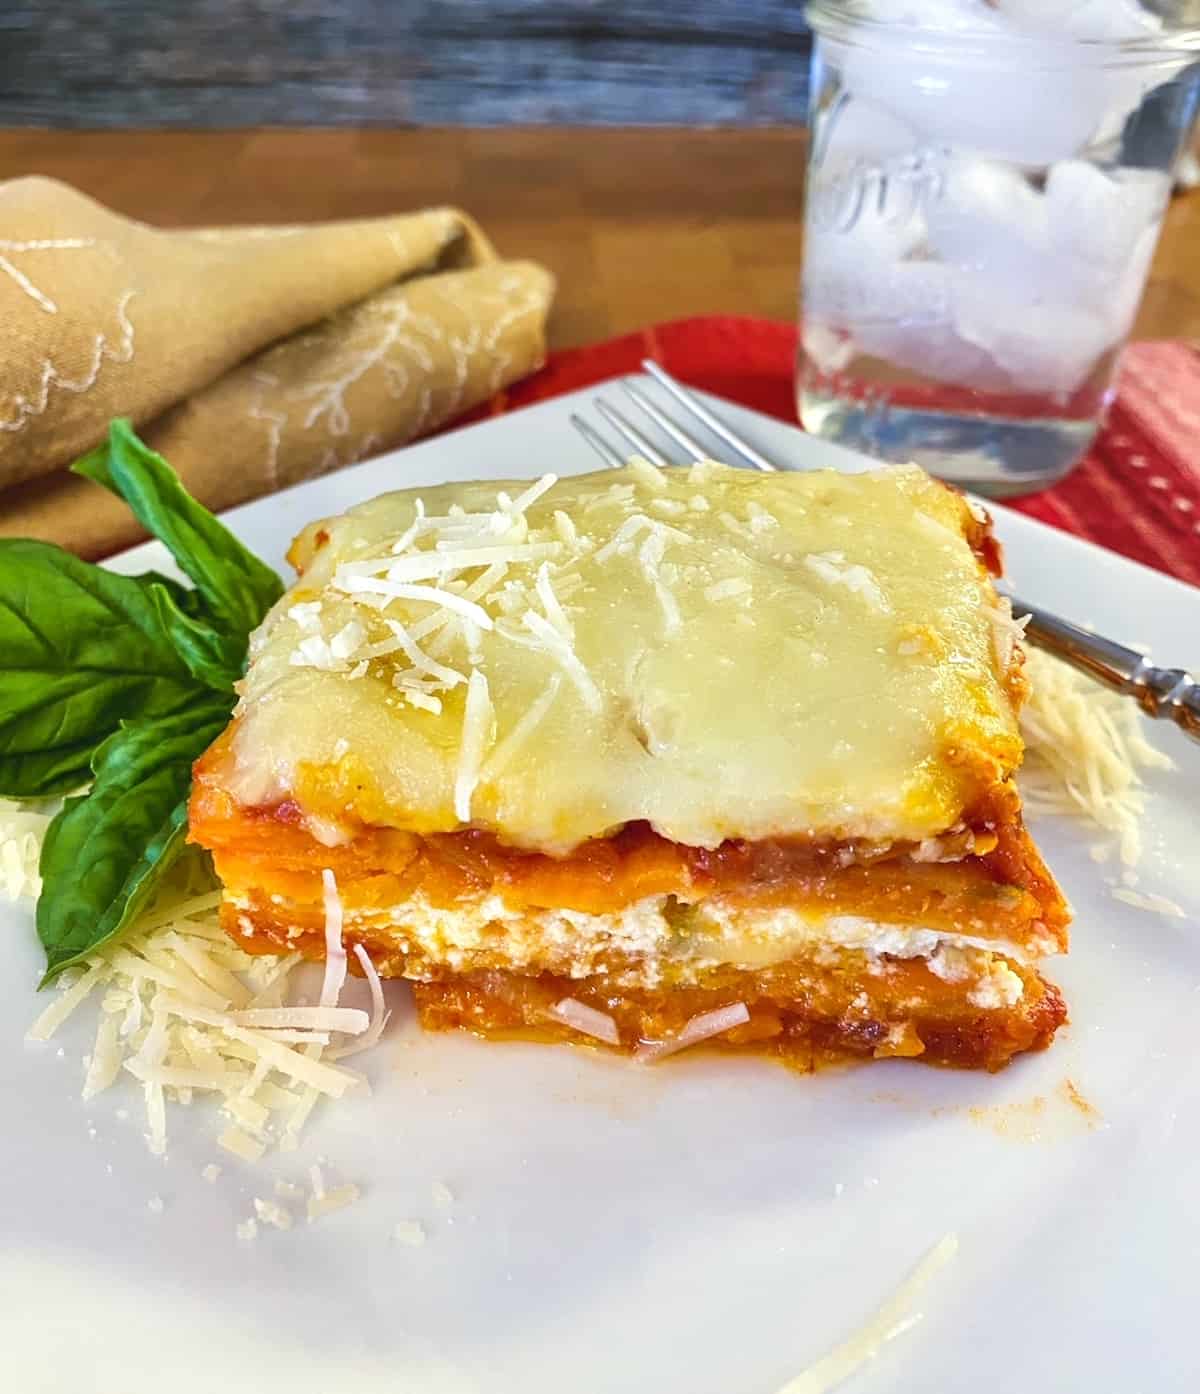 A serving of sweet potato lasagna on a plate with a glass of water off to the side.